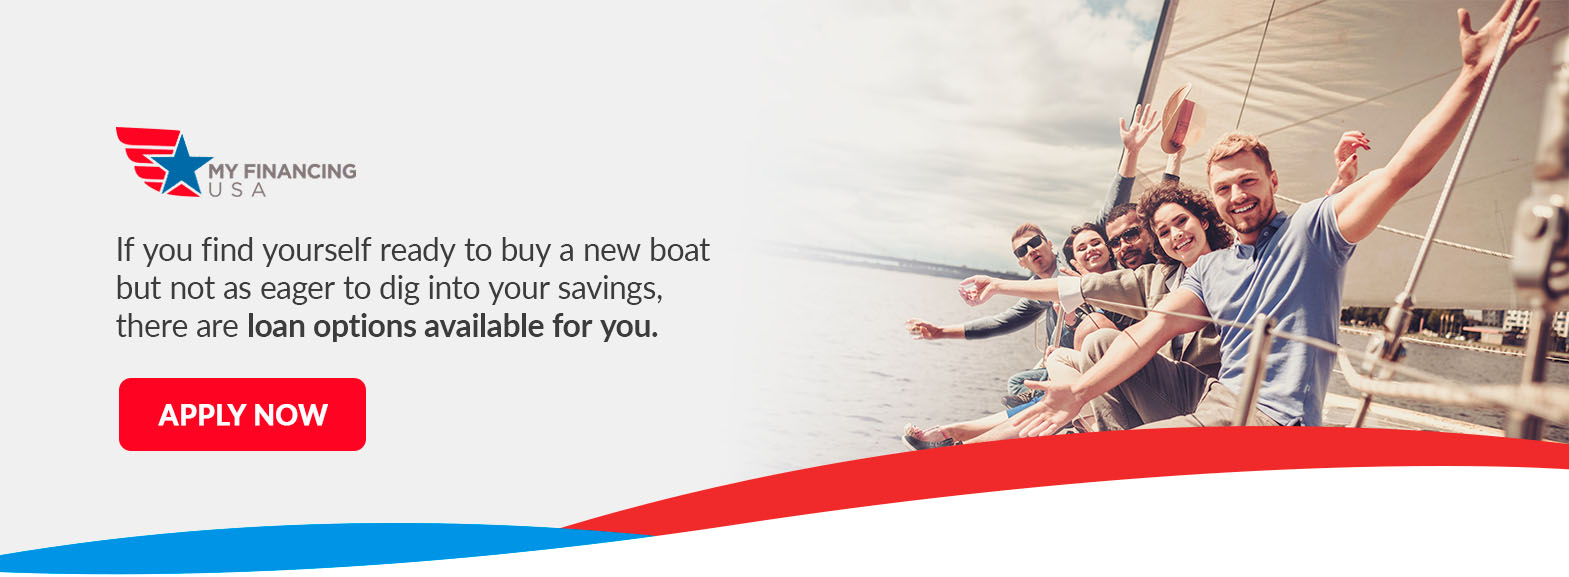 If you find yourself ready to buy a new boat but not as eager to dig into your savings, there are loan options available for you. Apply now!